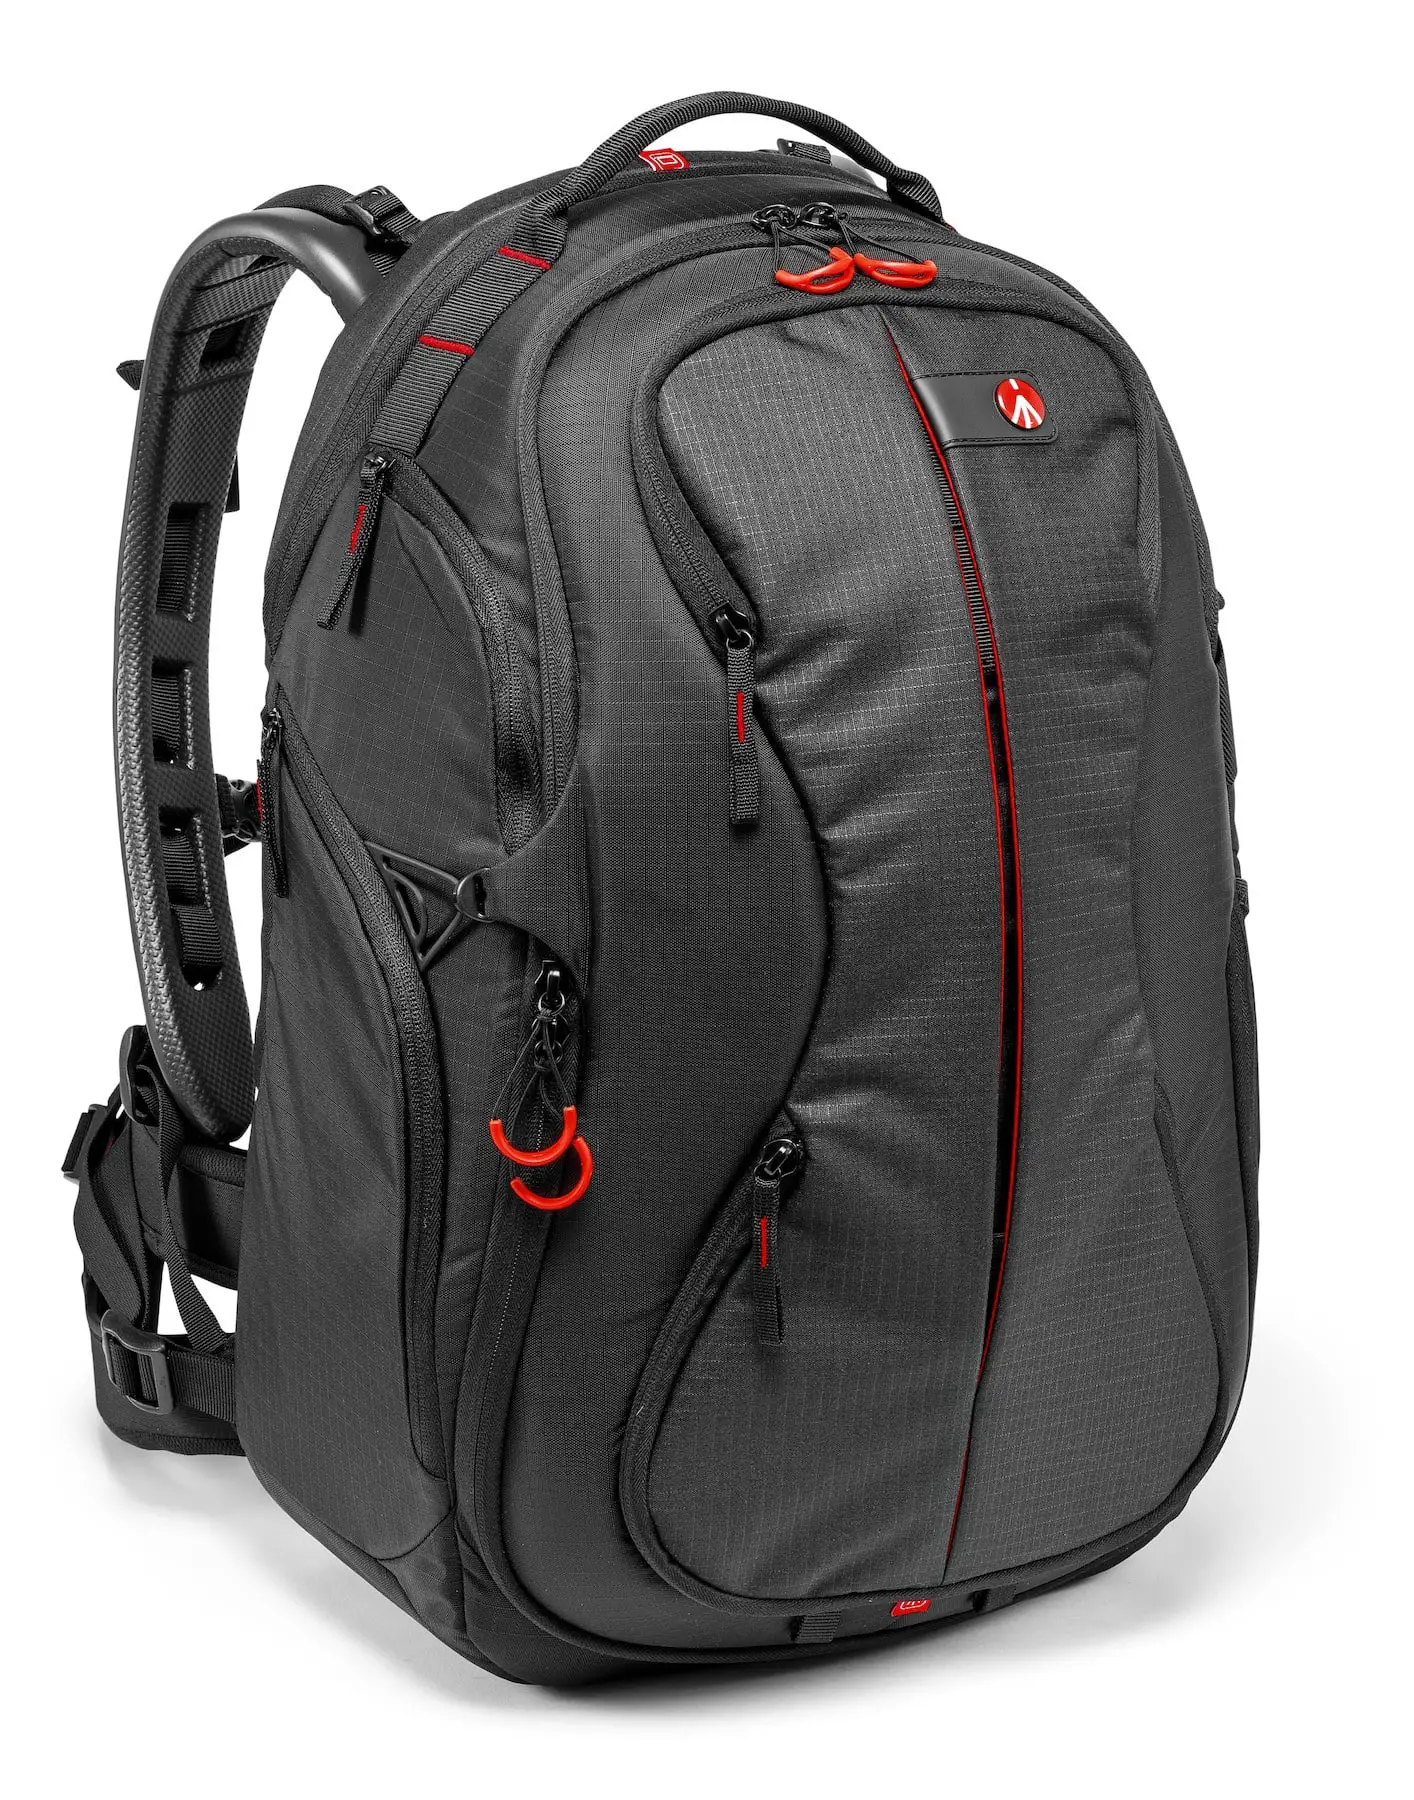 Manfrotto Bumblebee 220L Camera Bag - Whats in Our Camera Equipment 